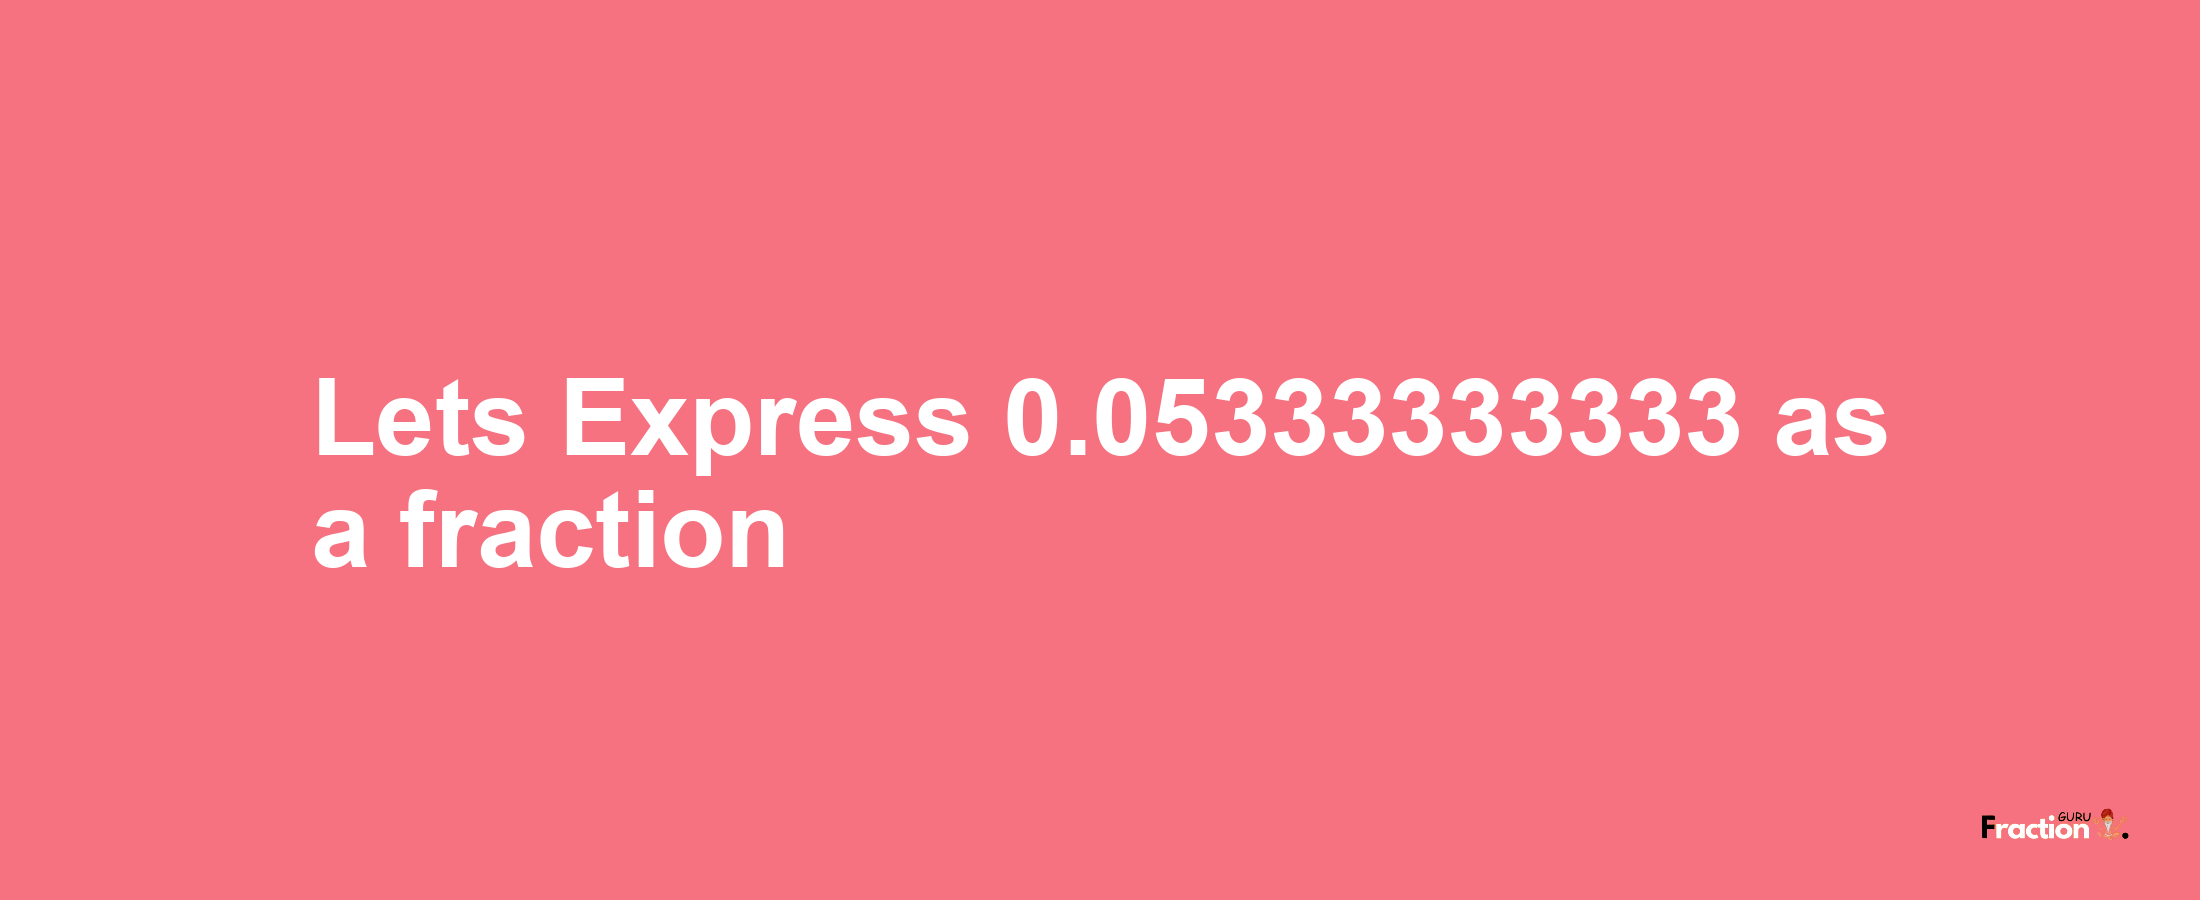 Lets Express 0.05333333333 as afraction